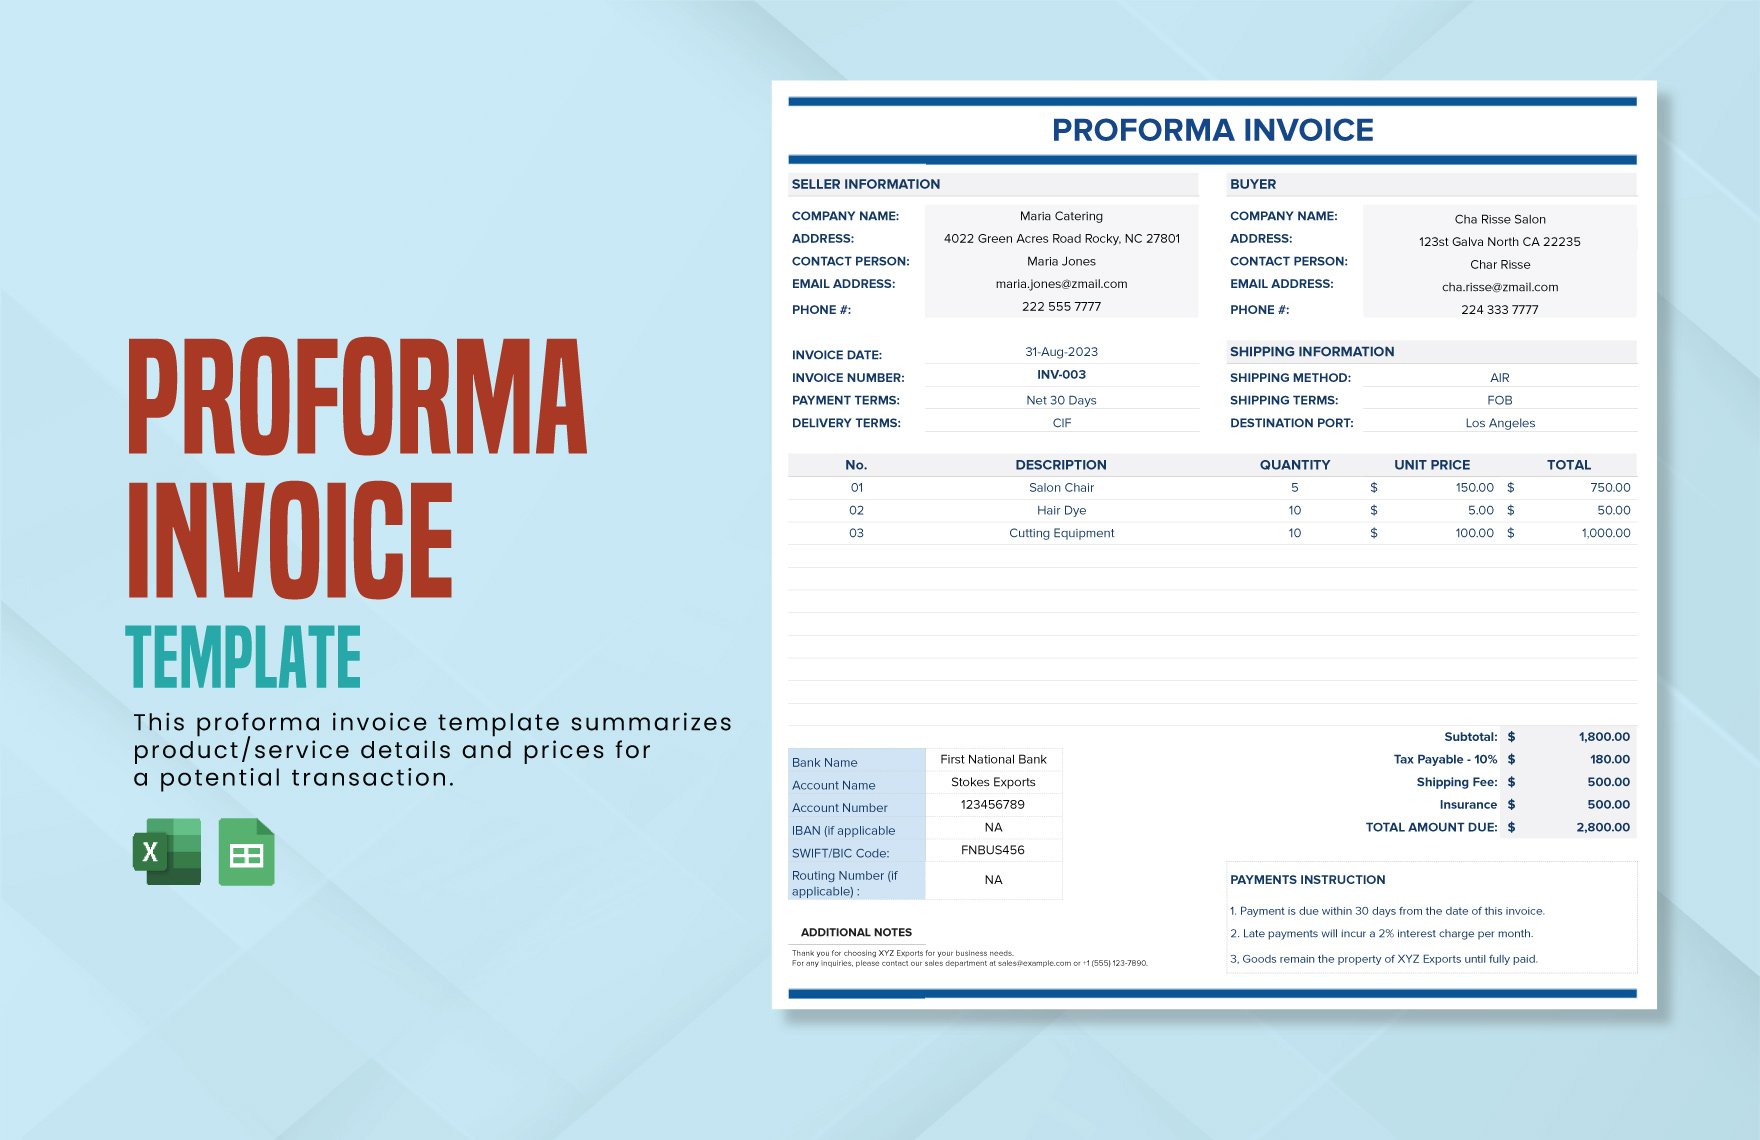 Free Proforma Invoice Template in Excel, Google Sheets